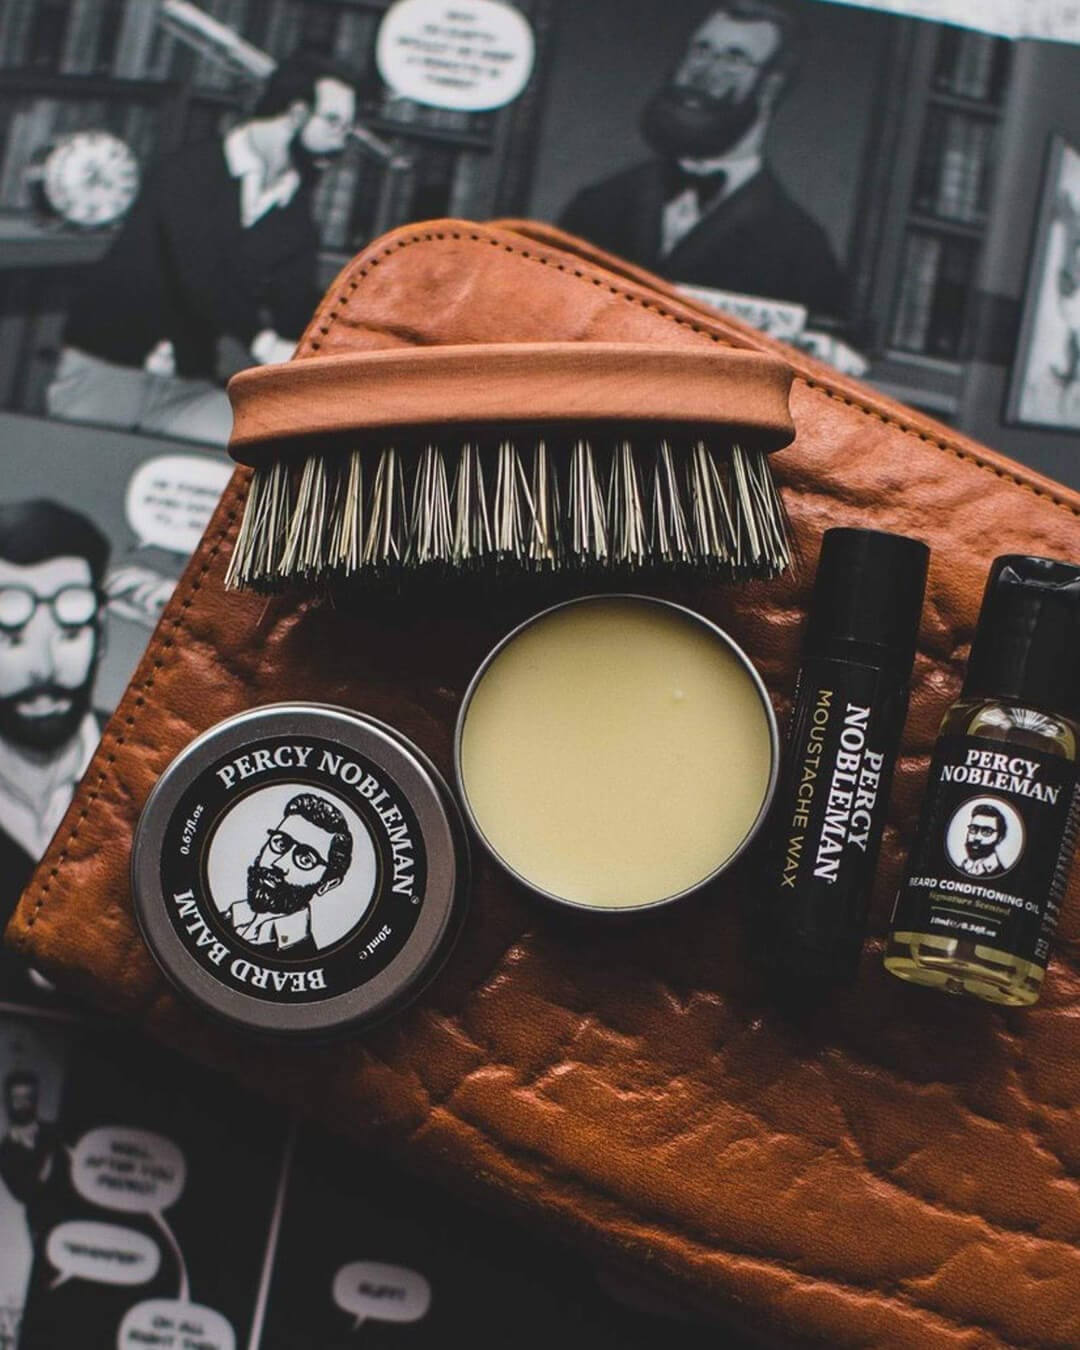 Percy Nobleman Gifts One Size Percy Nobleman Beard Survival Kit